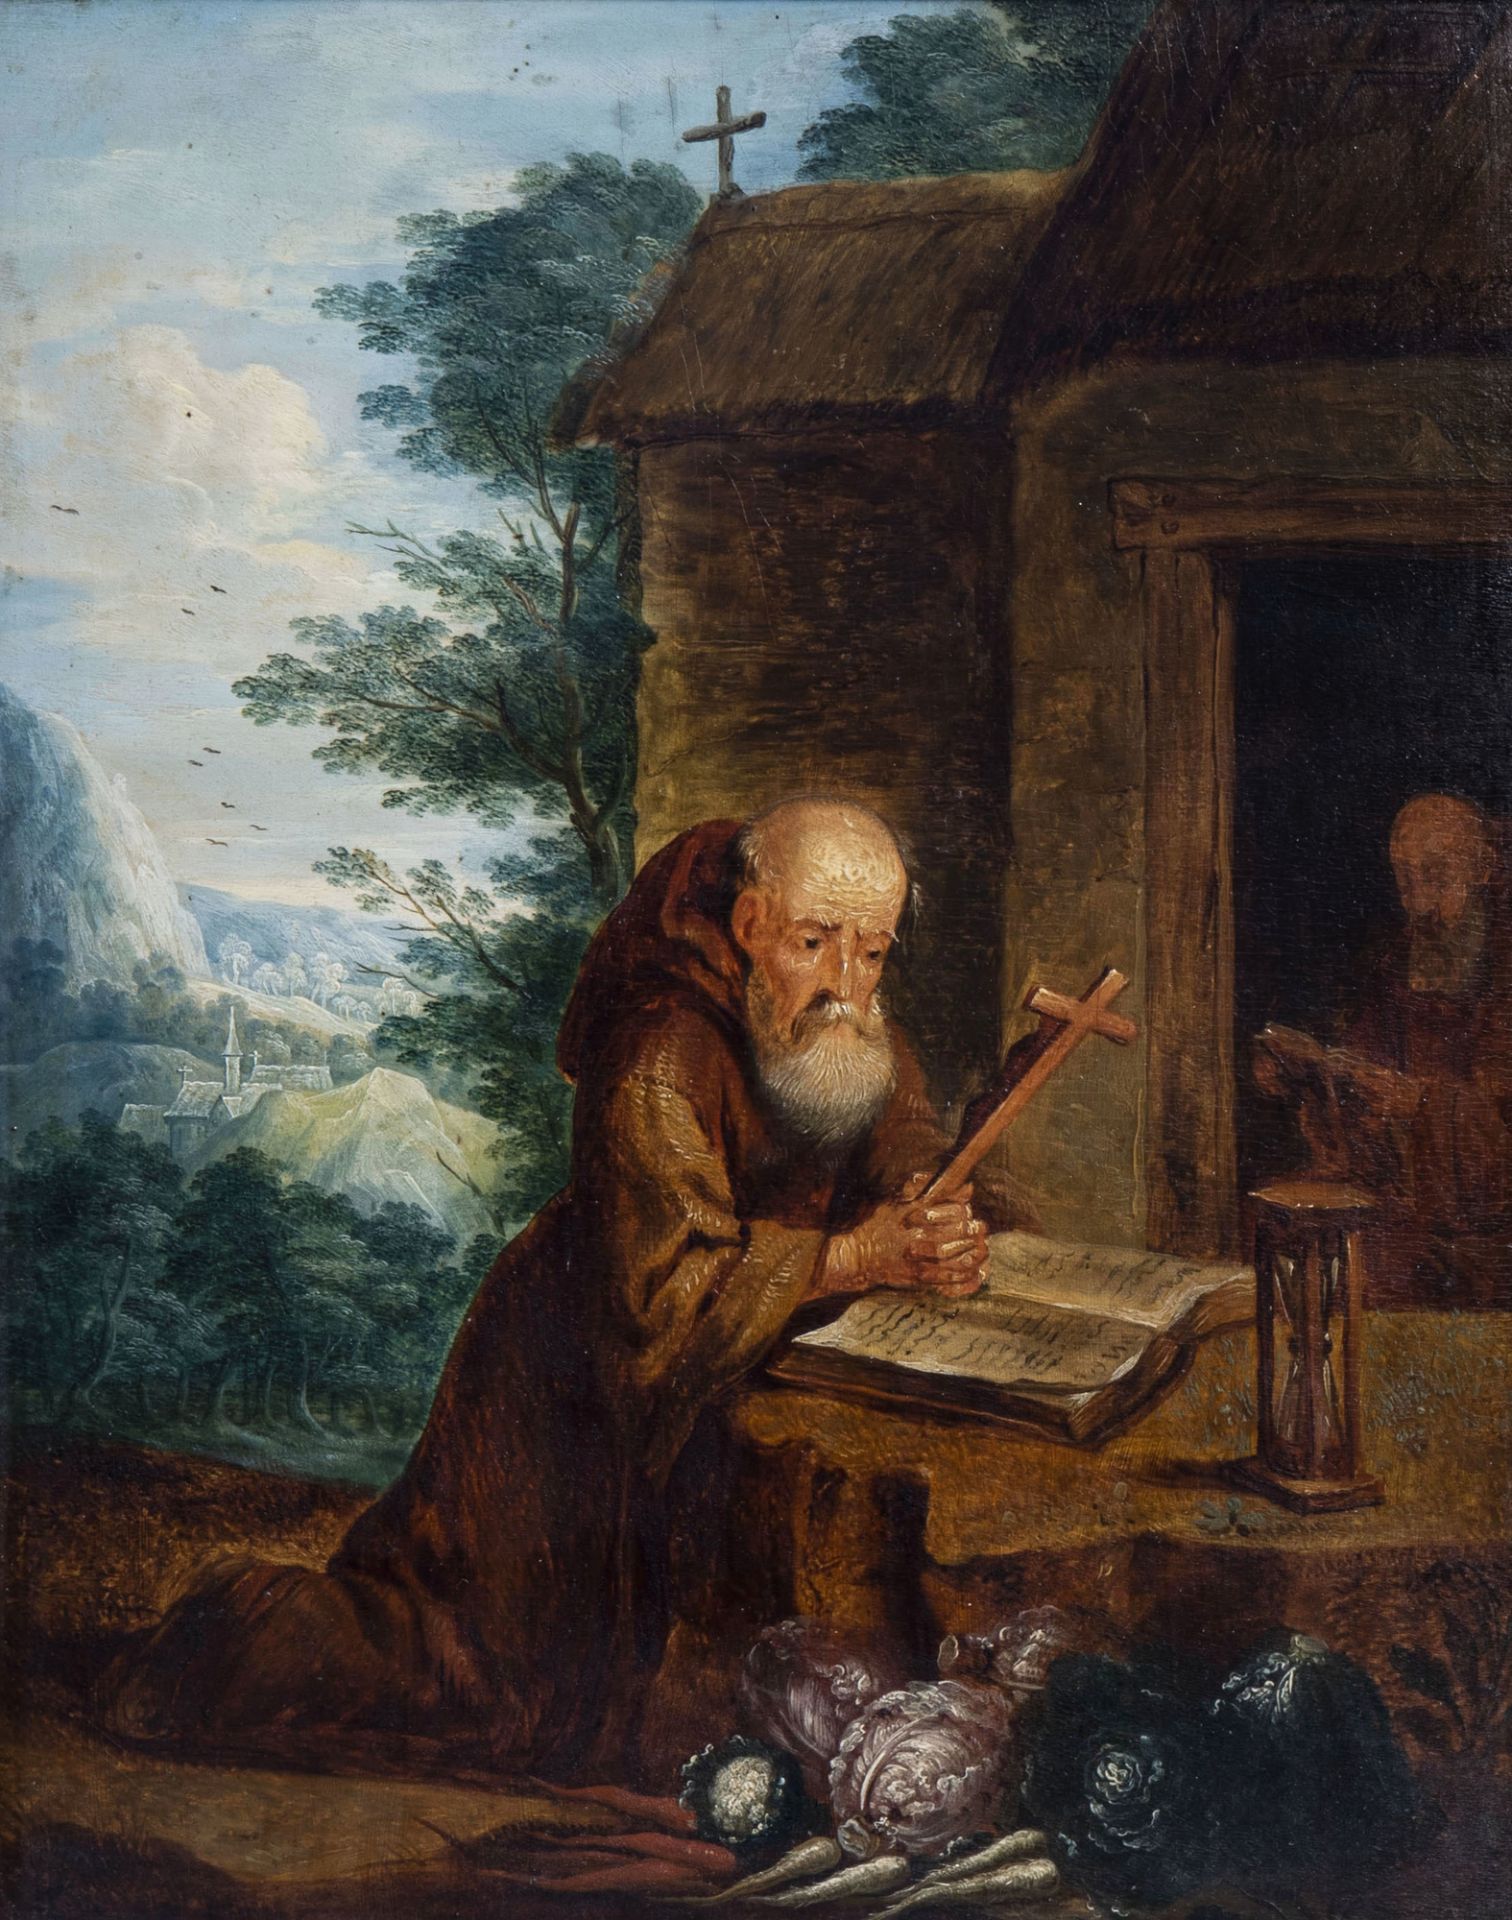 Flemish school: Two hermits meditating in the wilderness, oil on panel, 17th C.